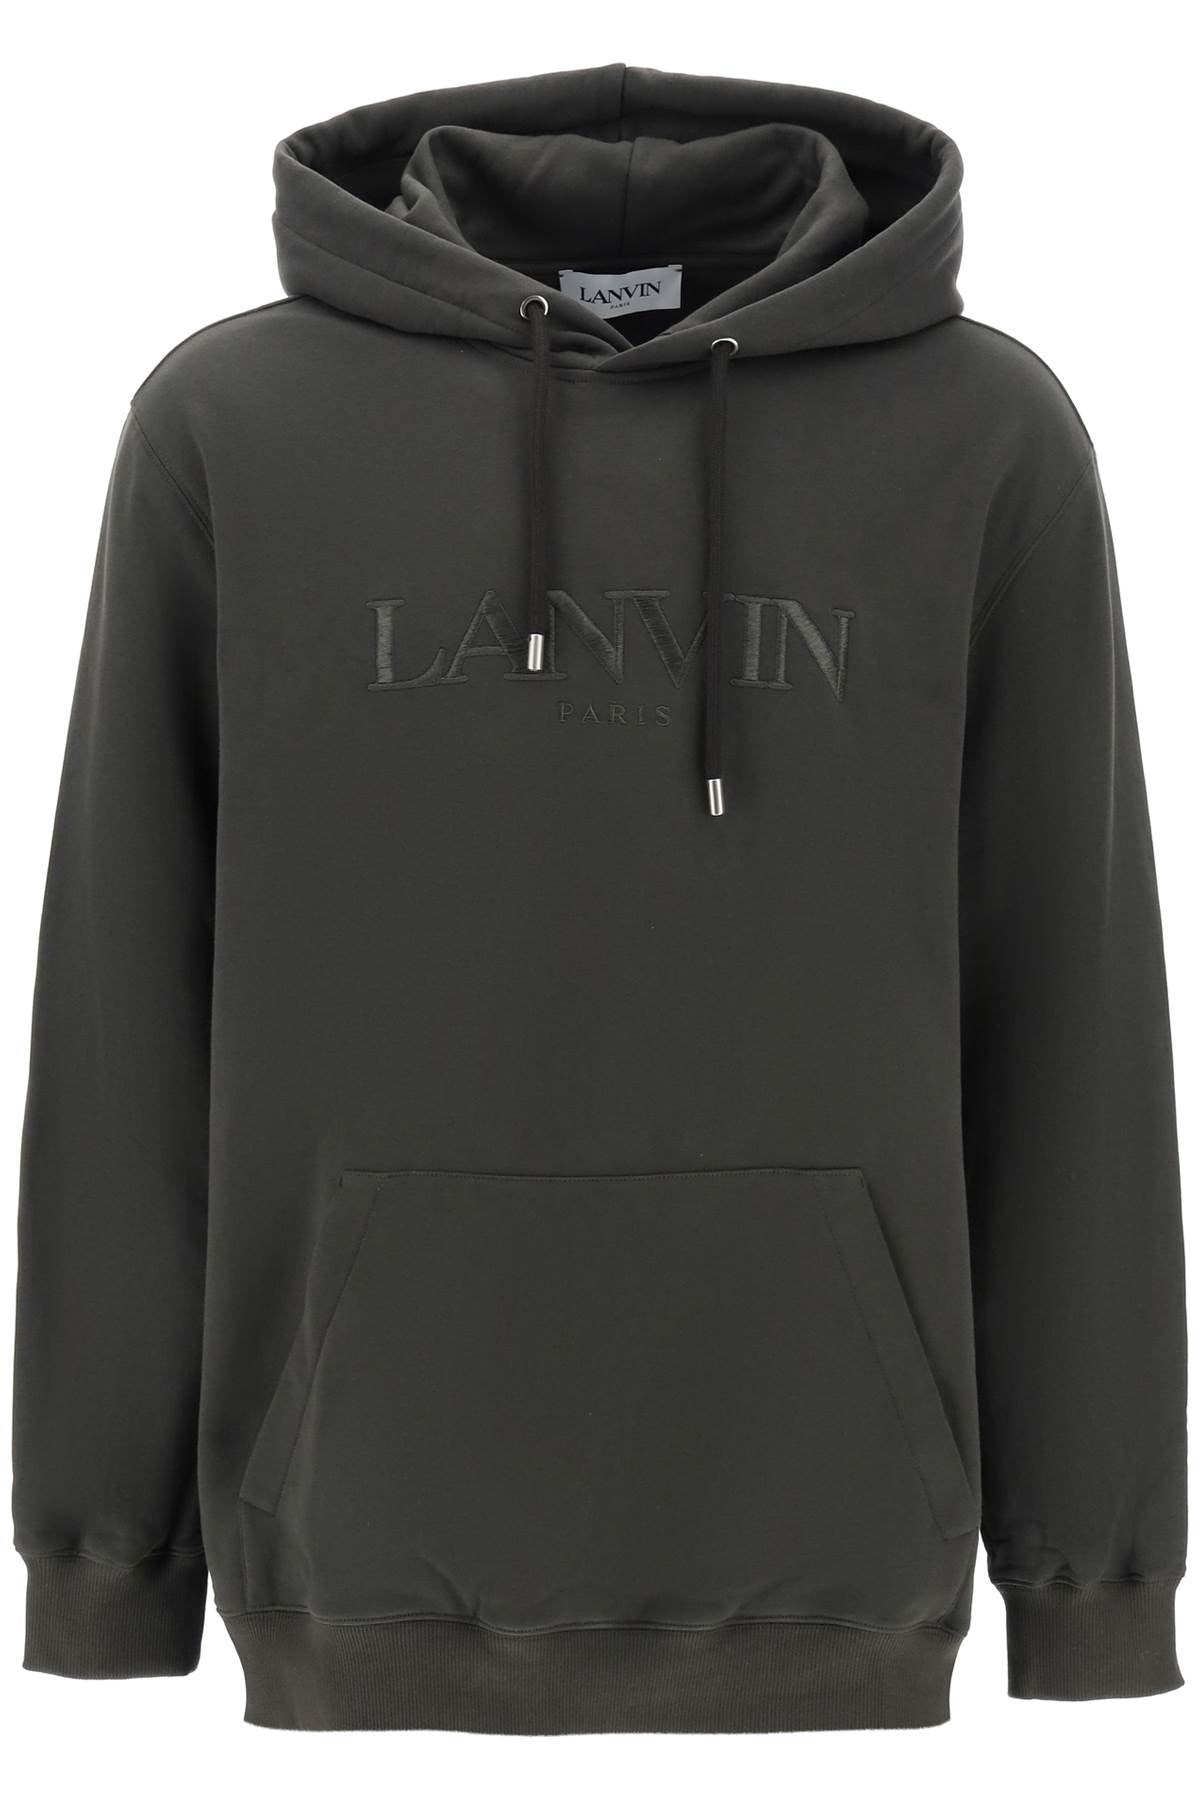 Shop Lanvin Green Embroidered Hoodie For Men